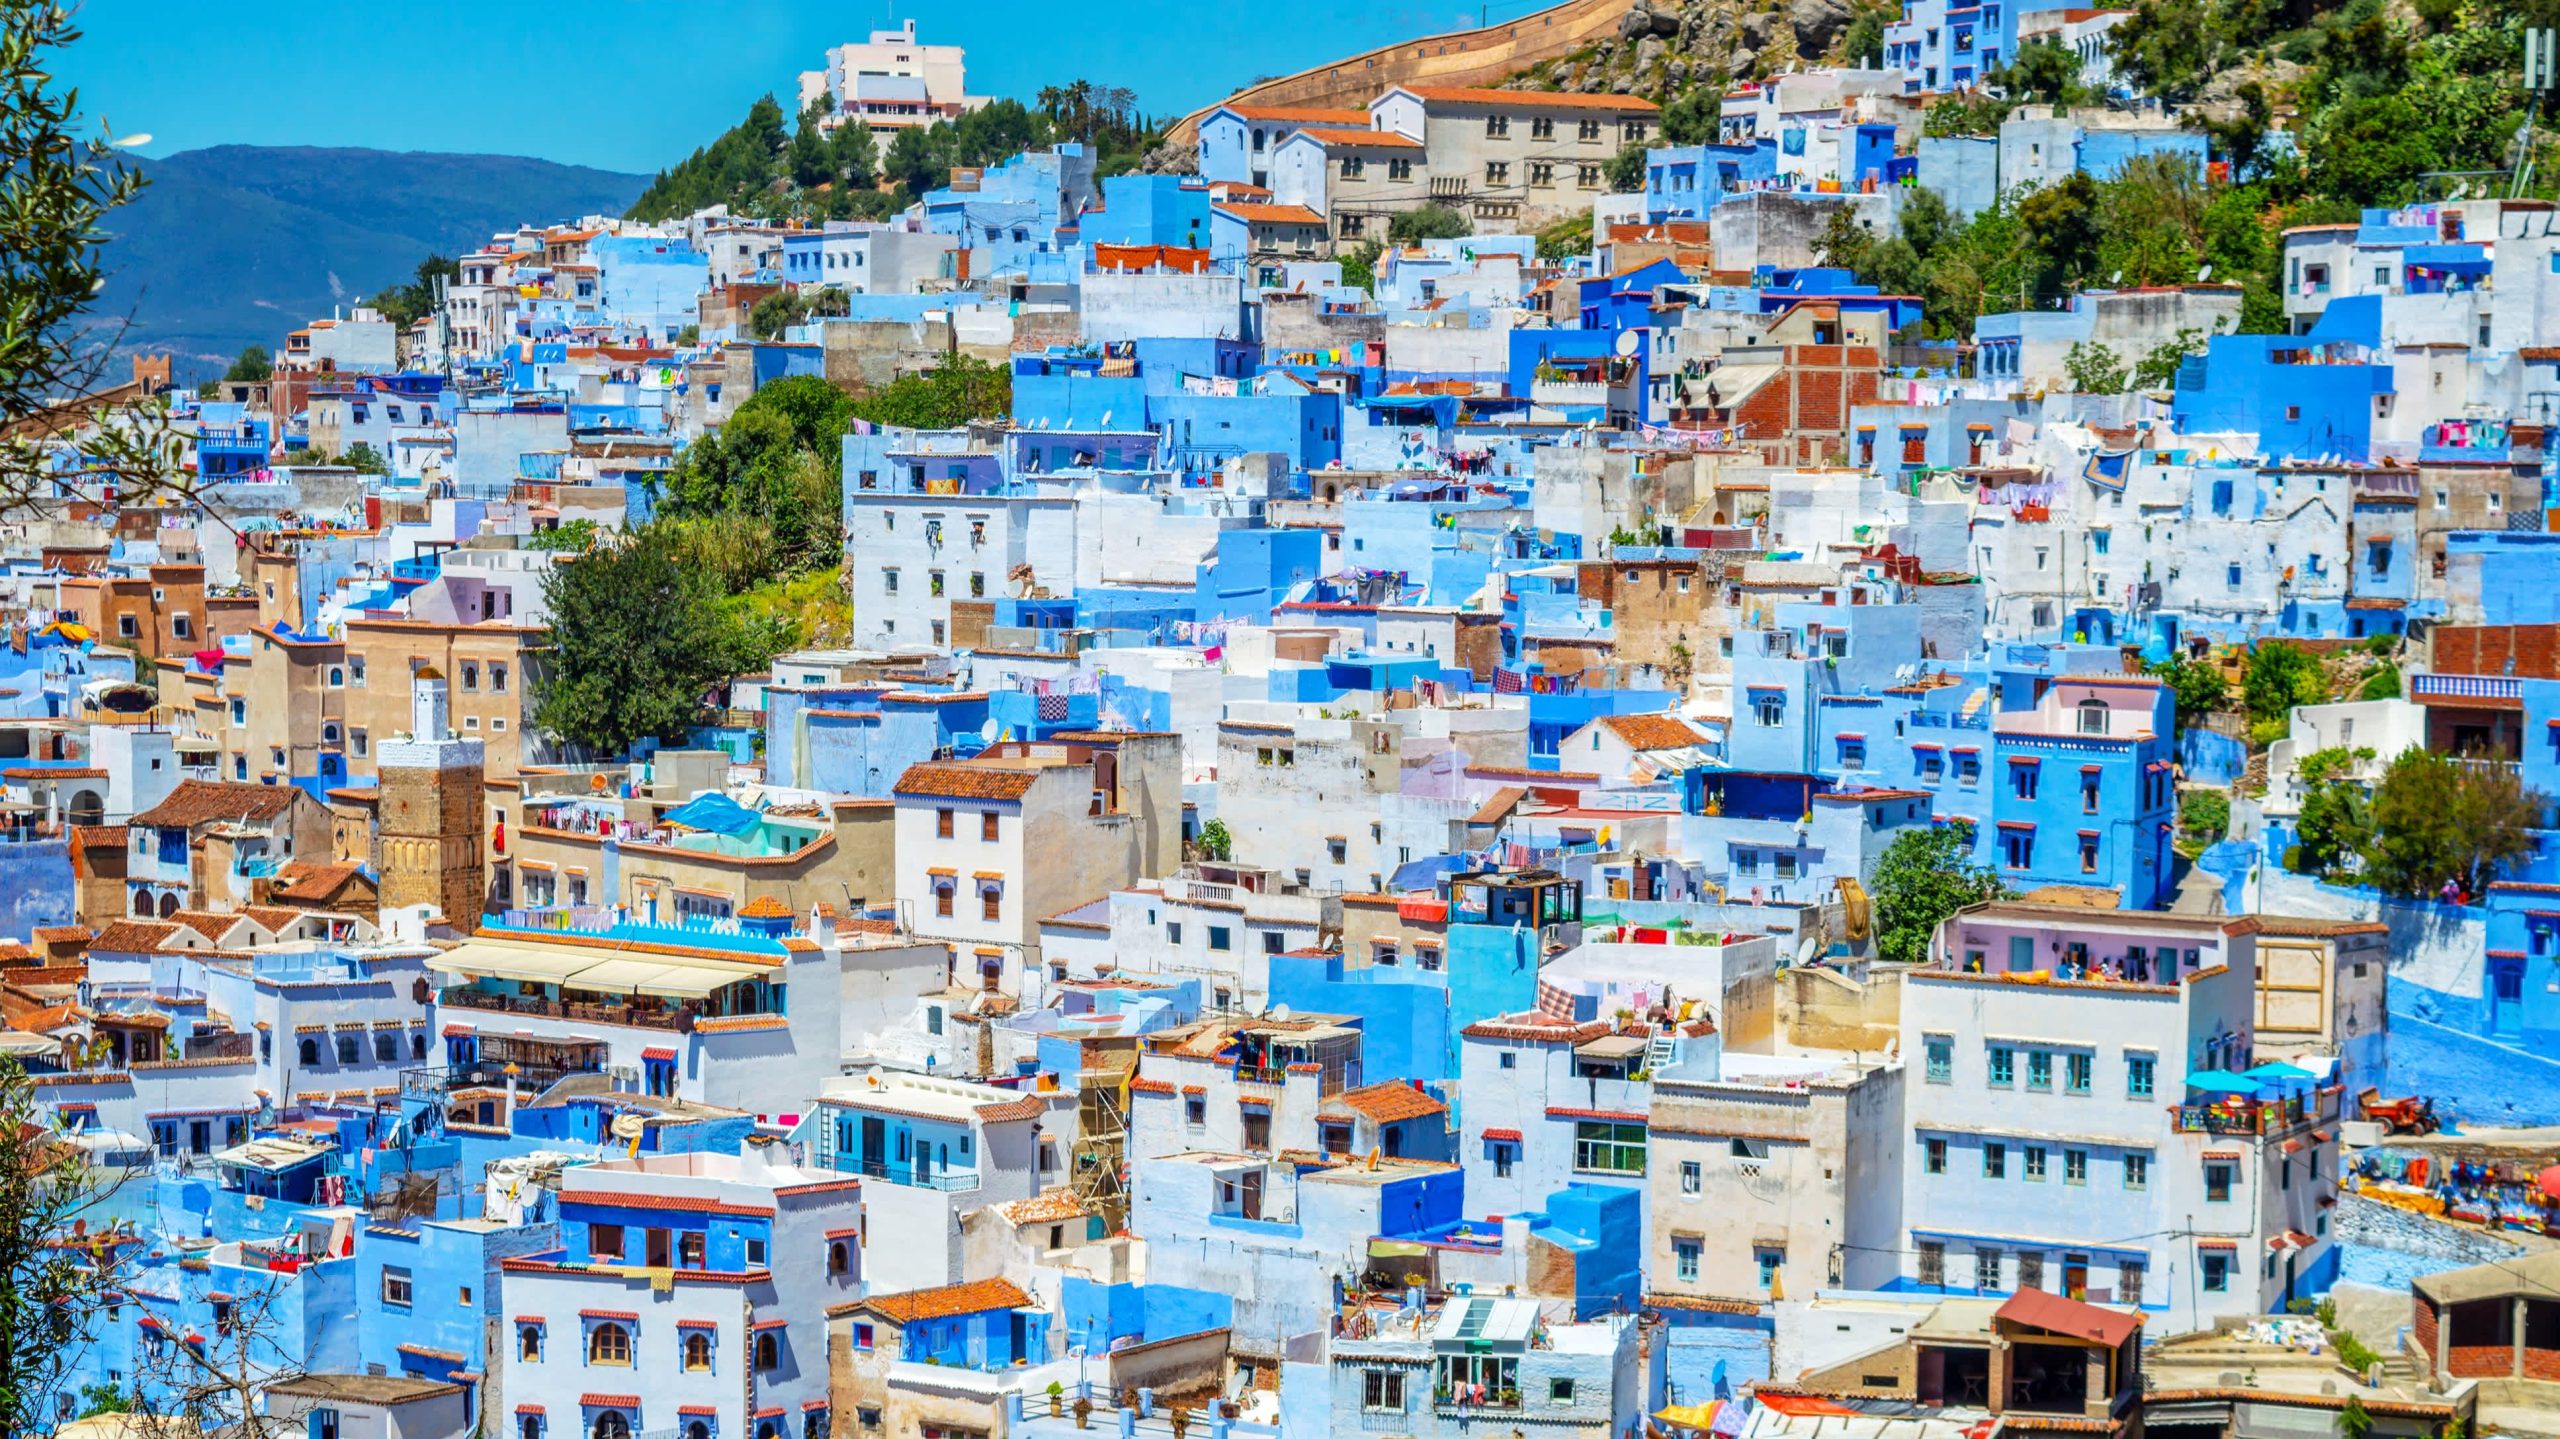 Vibrant streets of Chefchaouen Medina, Morocco, showcasing blue-washed buildings and traditional architecture in this charming historic town.